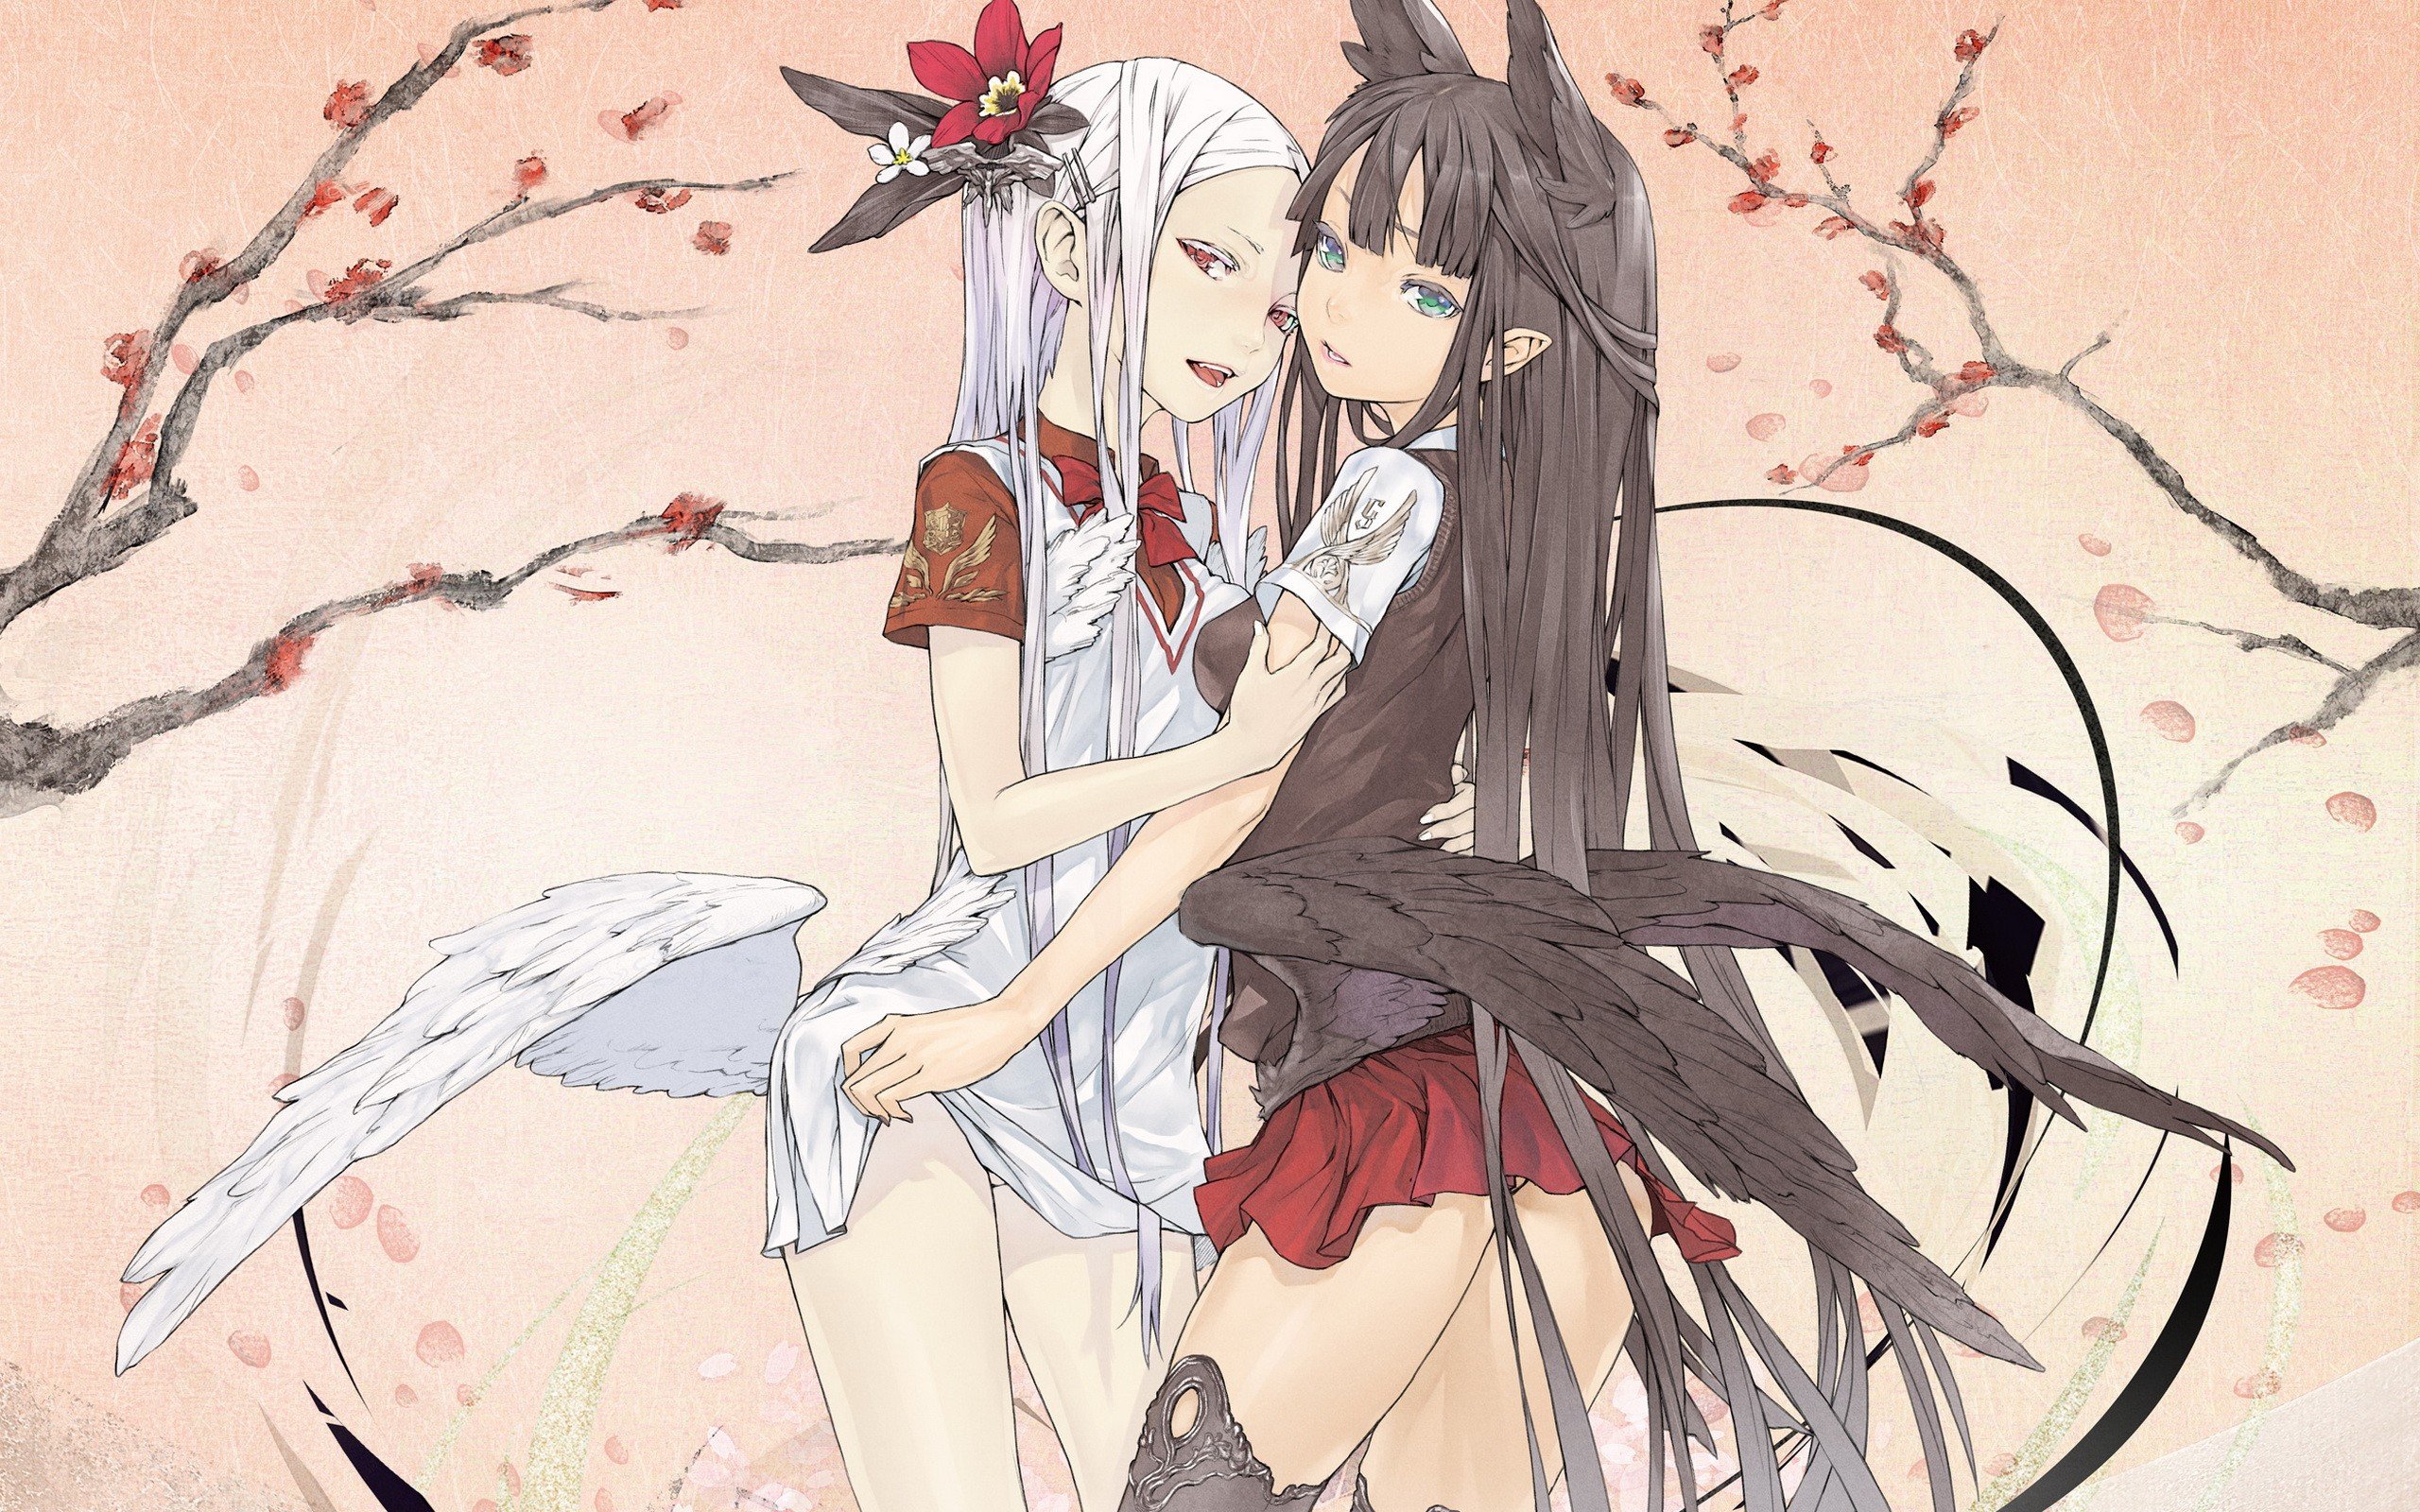 brunettes, Wings, Flowers, Skirts, Long, Hair, Green, Eyes, Animal, Ears, Red, Eyes, Thigh, Highs, Bows, Open, Mouth, White, Hair, White, Dress, Redjuice, Anime, Girls, Pointy, Ears, Branches, Hair, Ornaments, H Wallpaper